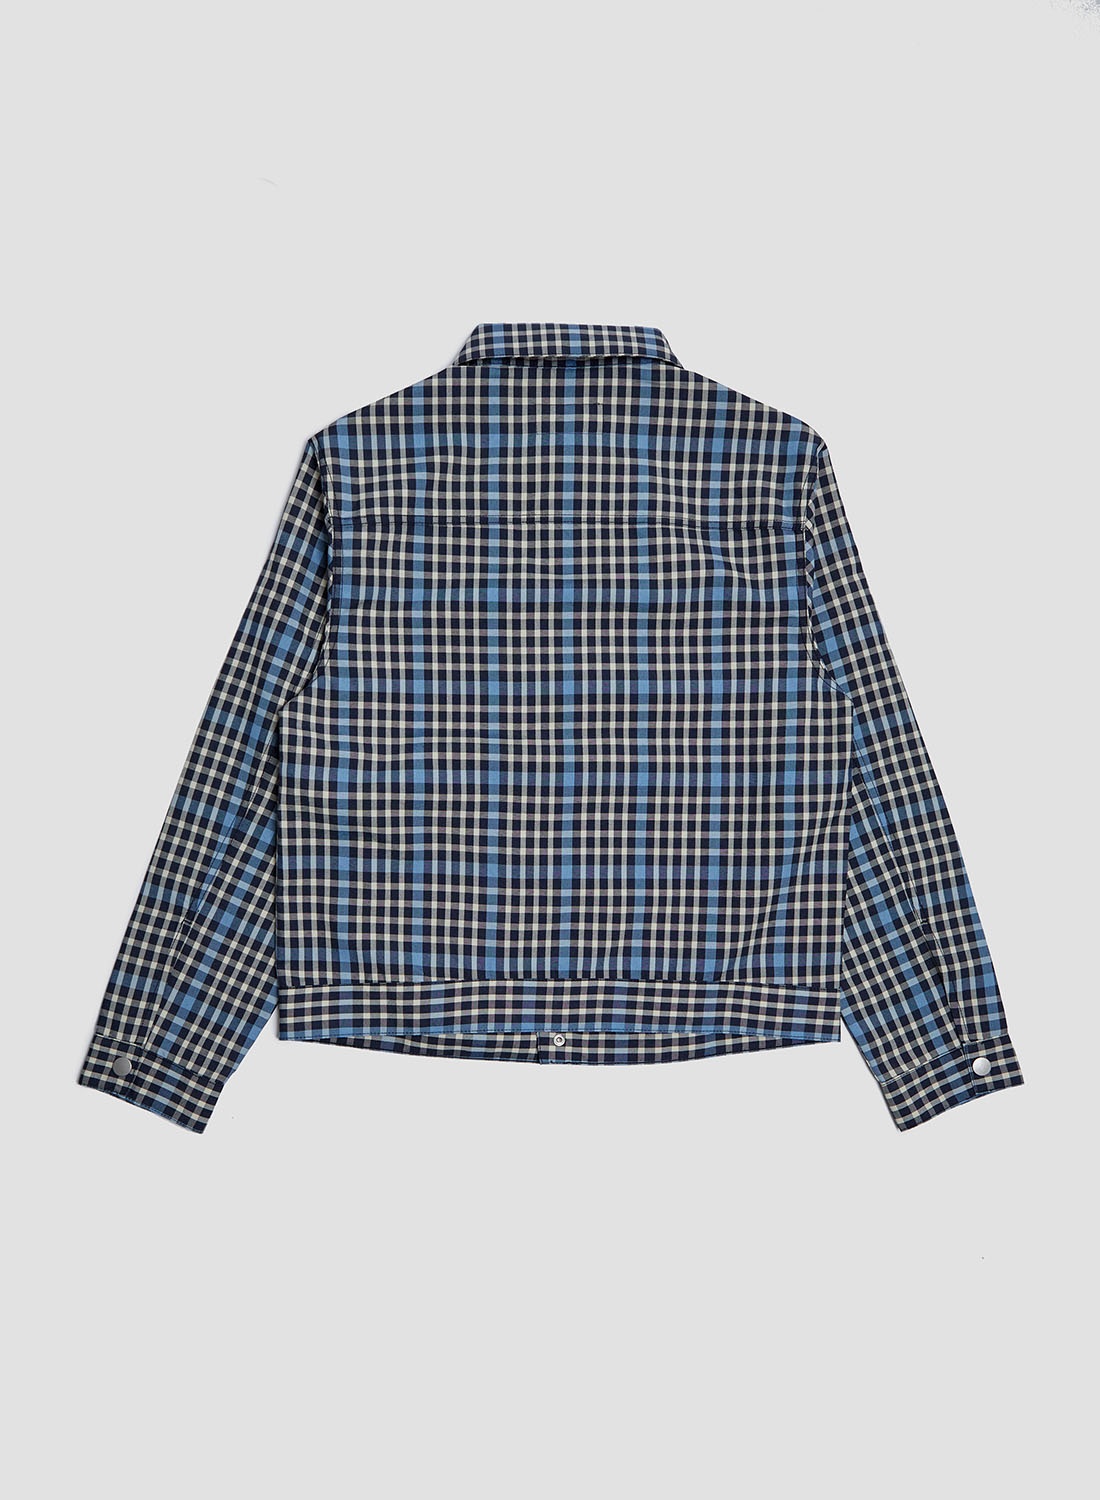 Japanese S Type 1 Jacket in Navy Check - 2